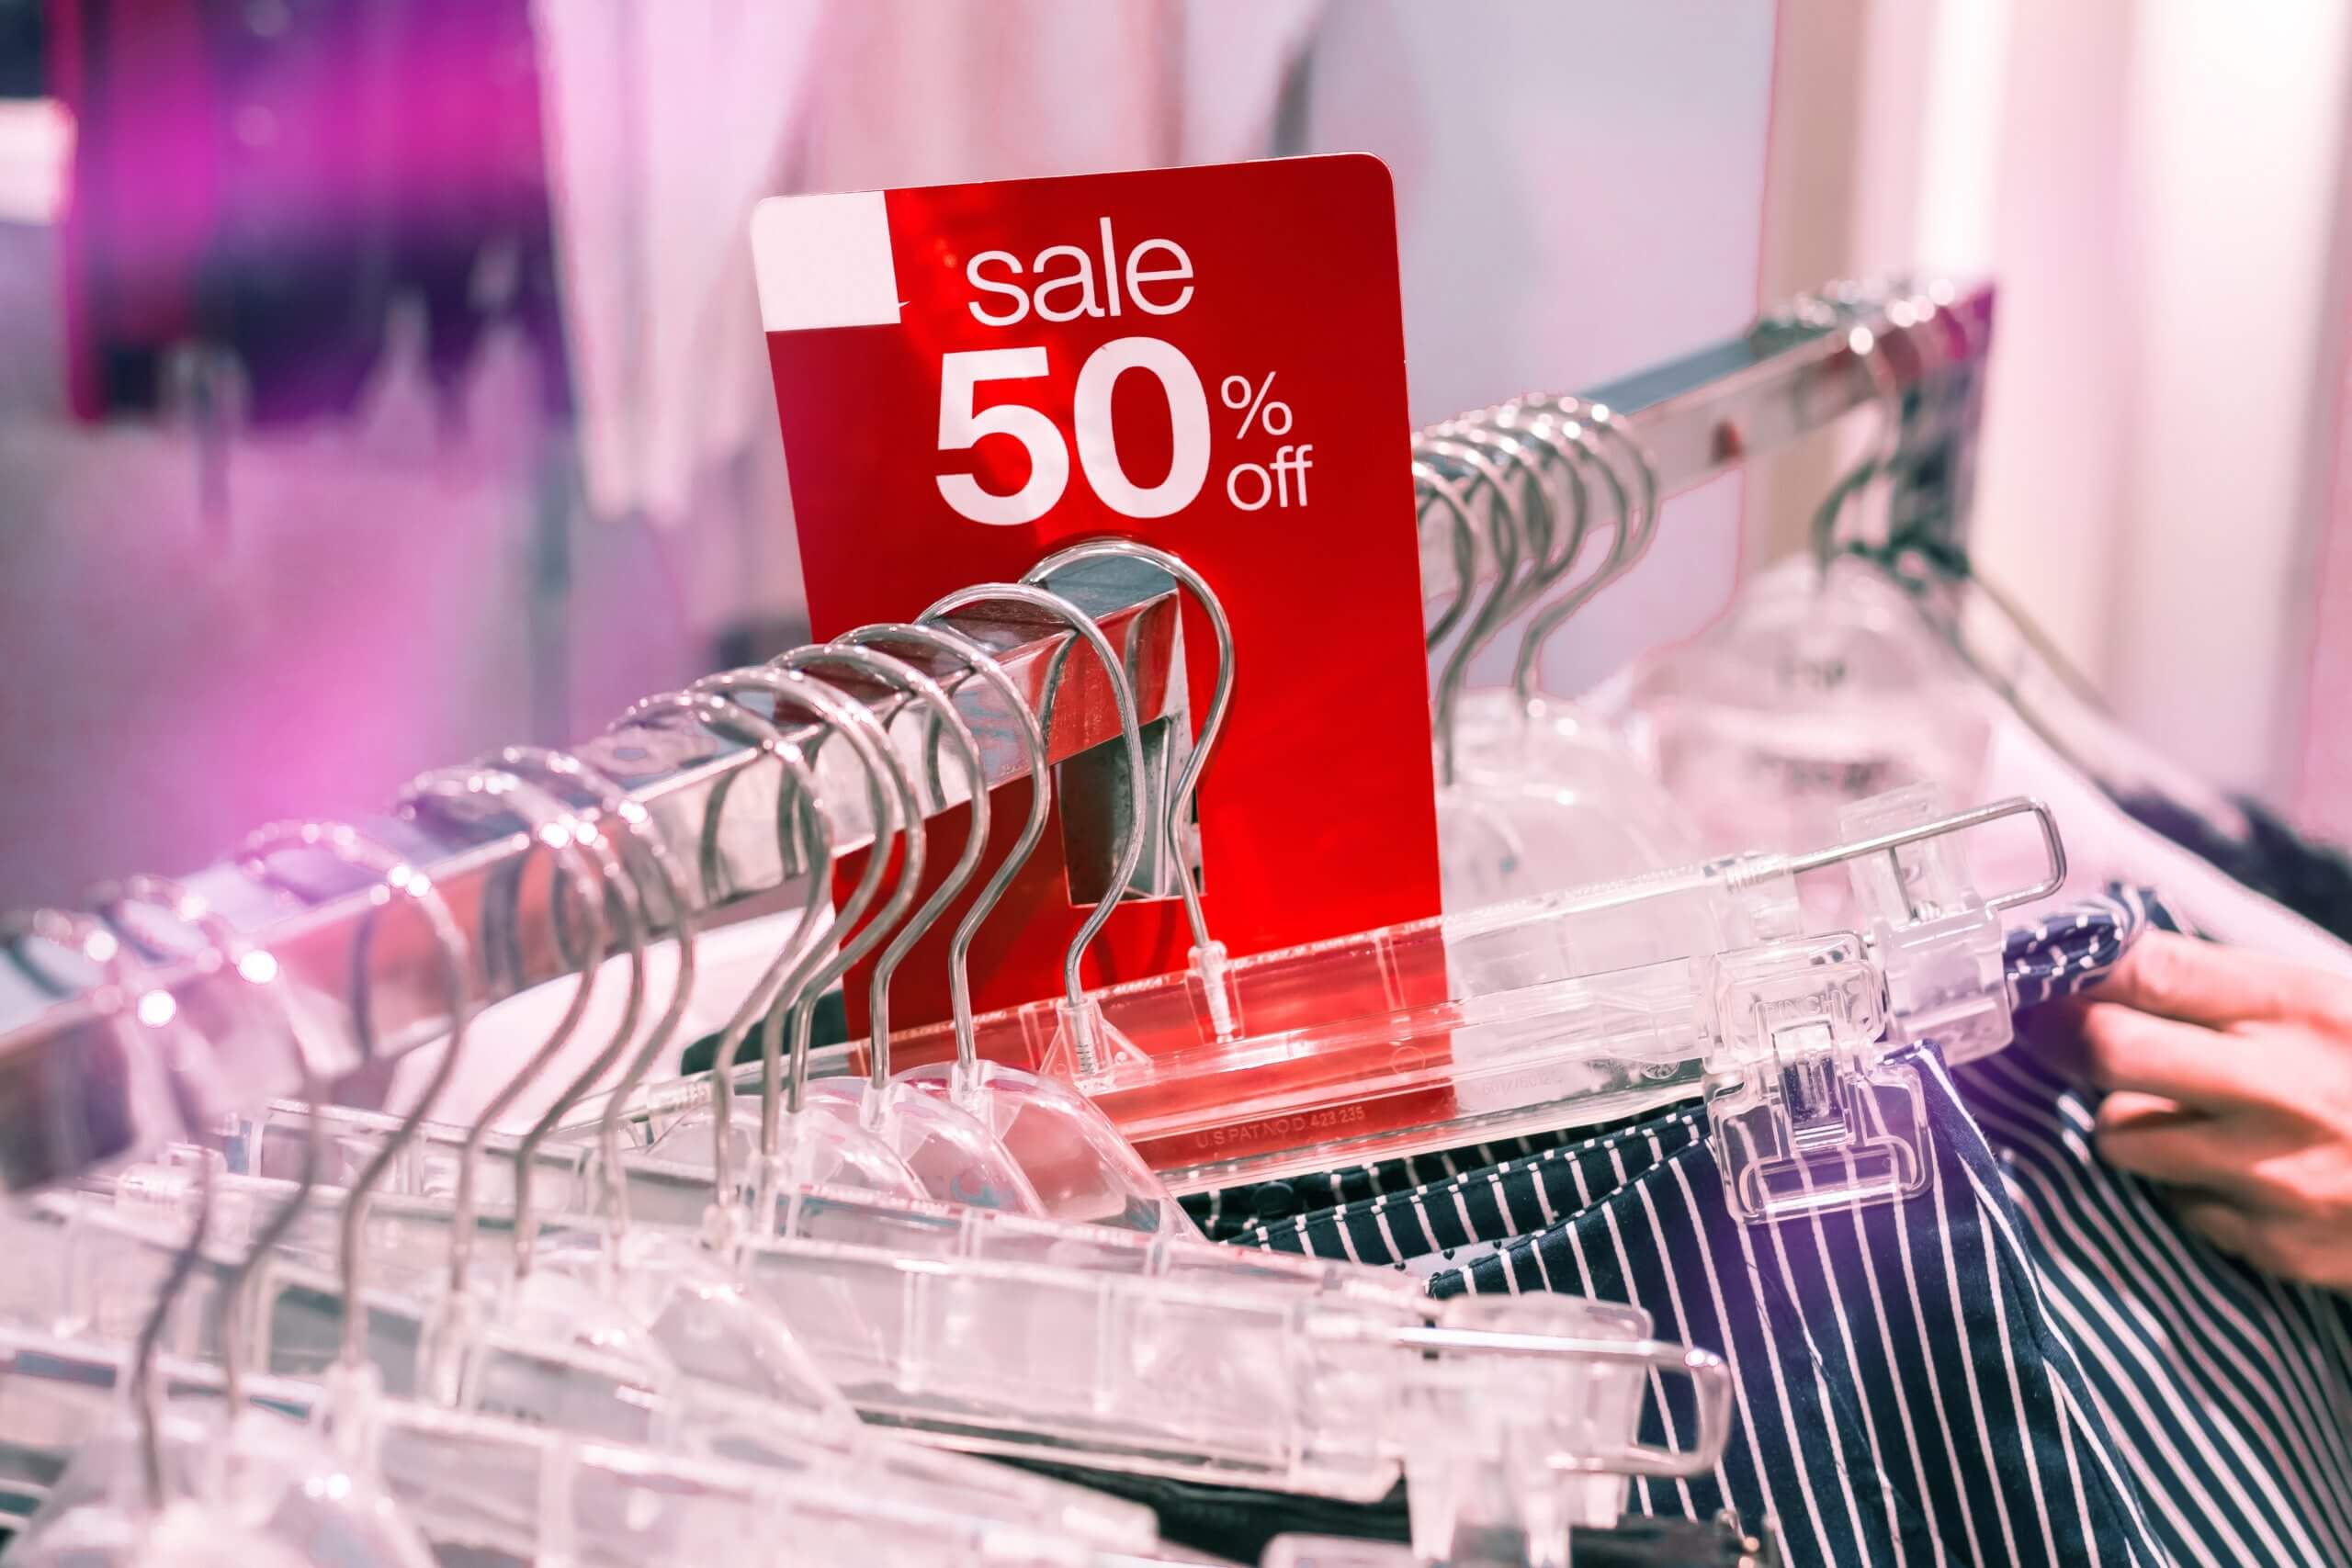 Buy now, pay later: how can retailers make it safer?